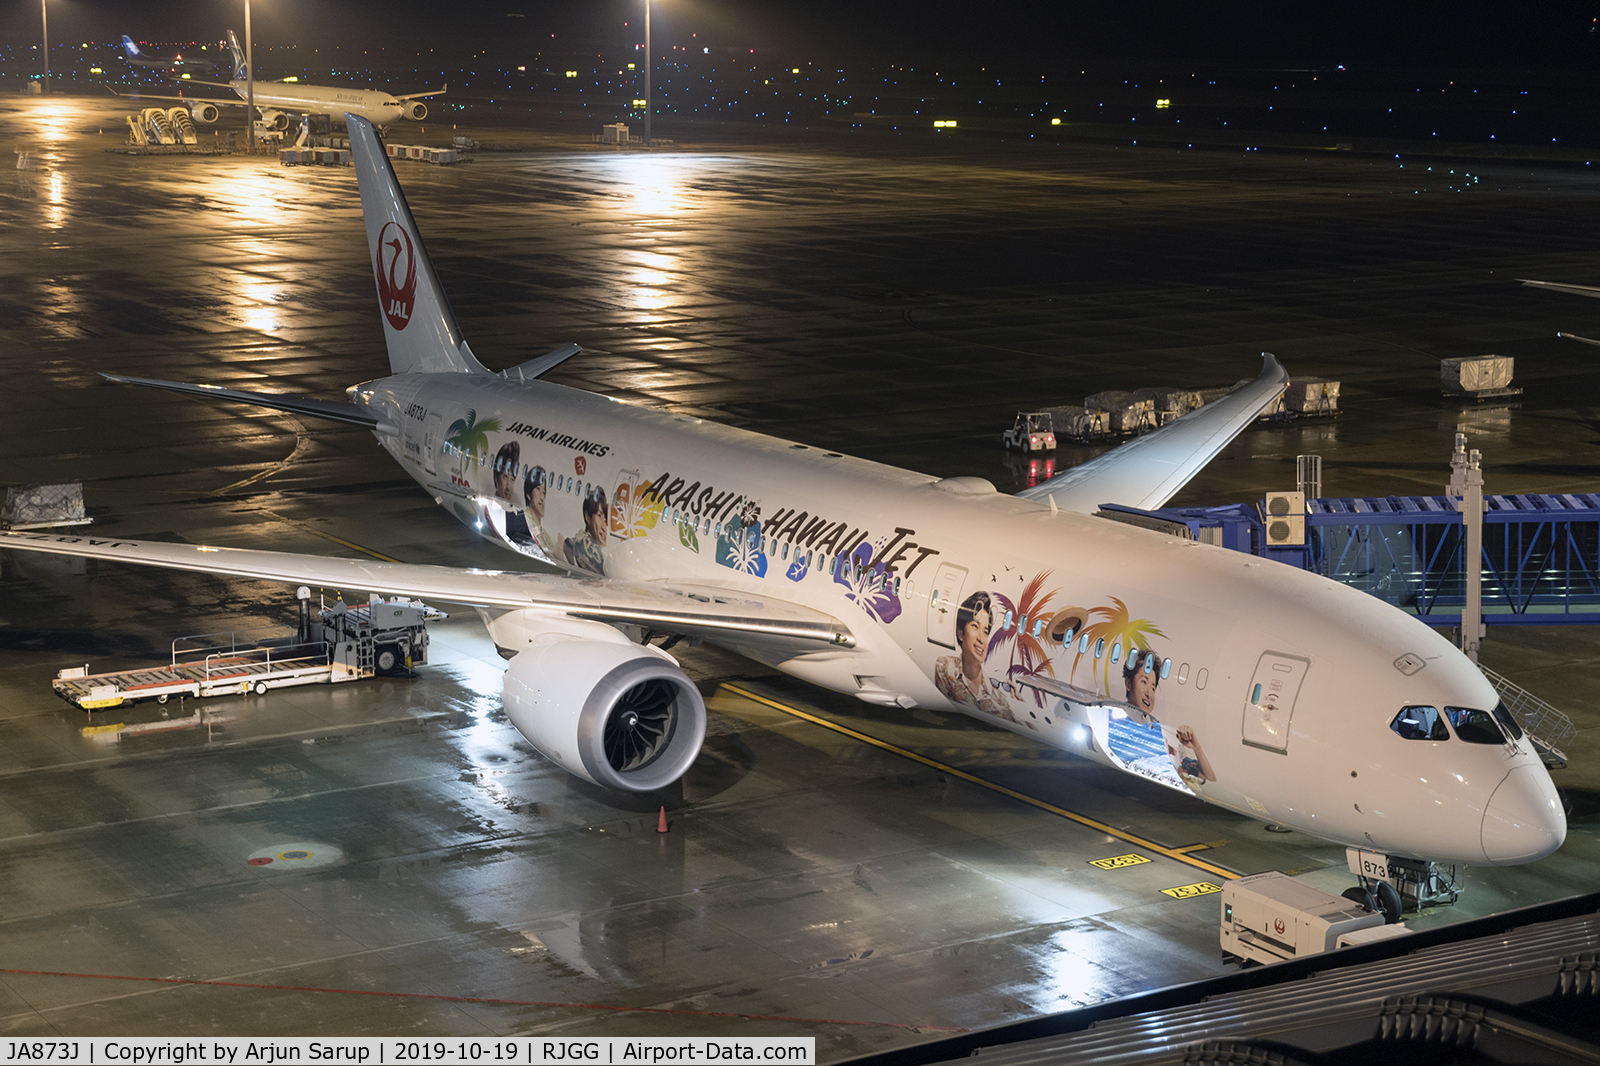 JA873J, 2018 Boeing 787-9 Dreamliner C/N 34852, Named after a Japanese boy band, “Arashi Hawaii Jet” is at the gate at Chubu Centrair International Airport on a wet night.